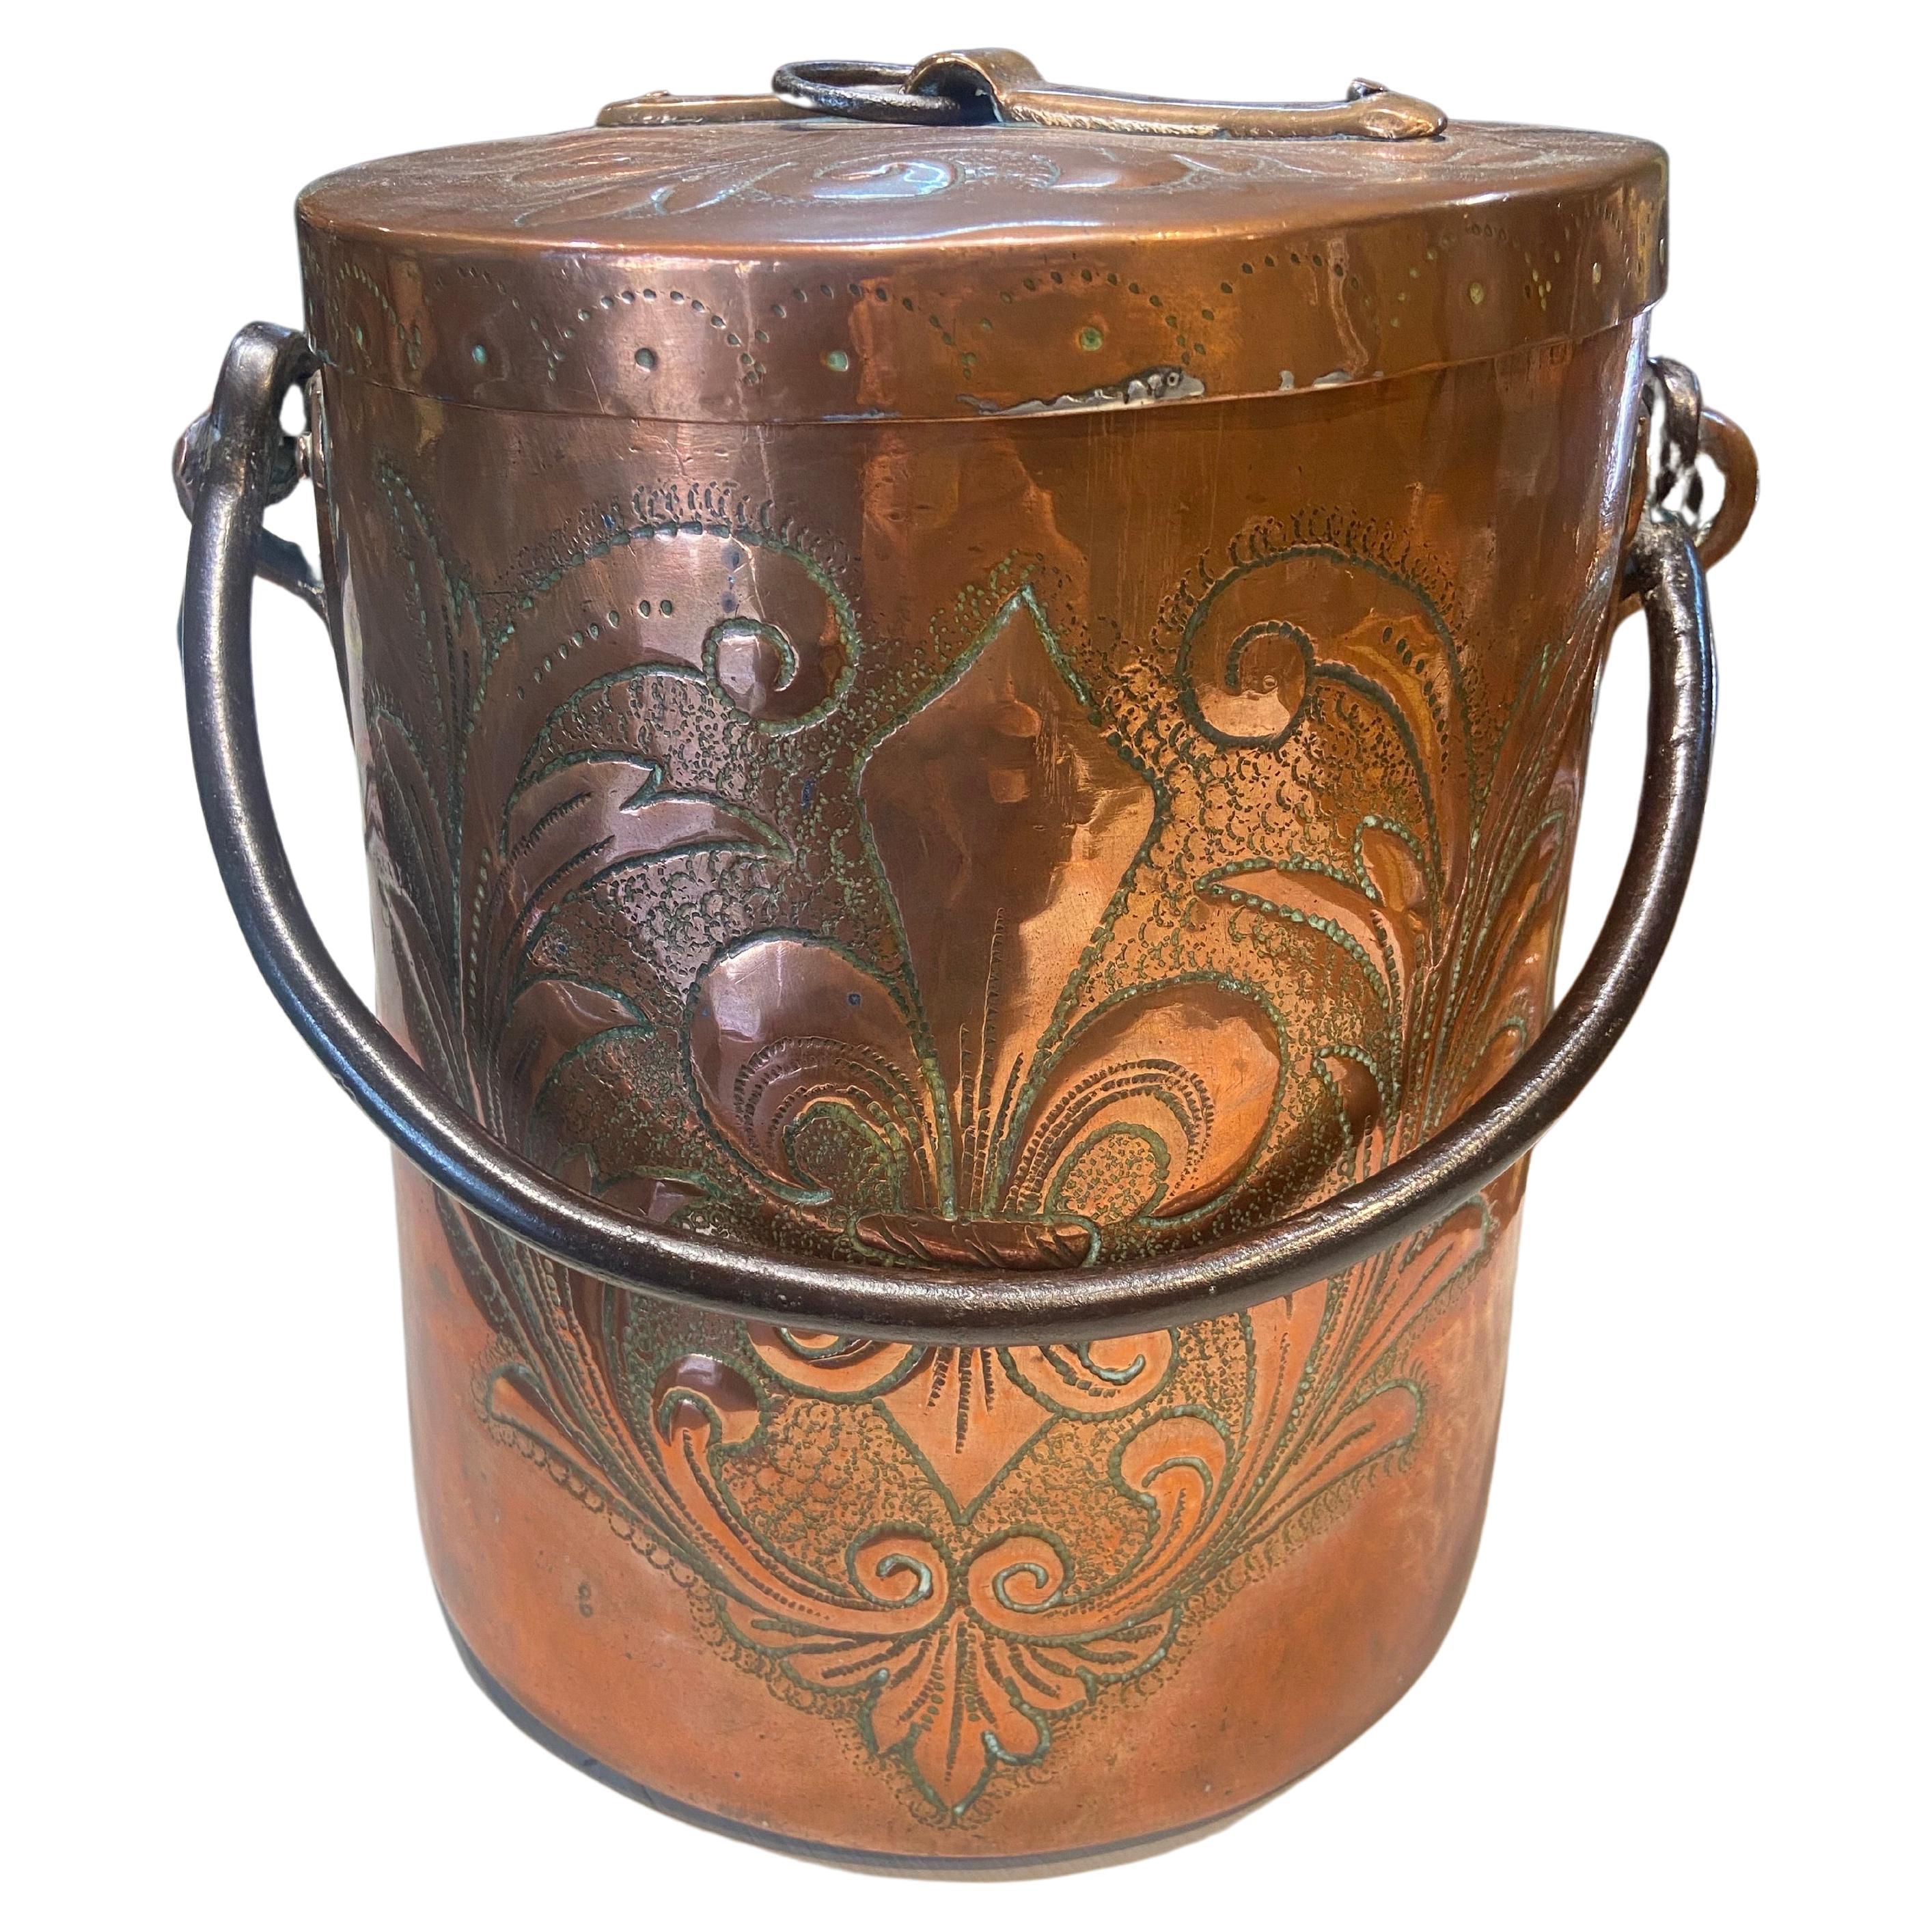 18th Century French Hammered Copper Container for Food Preservation